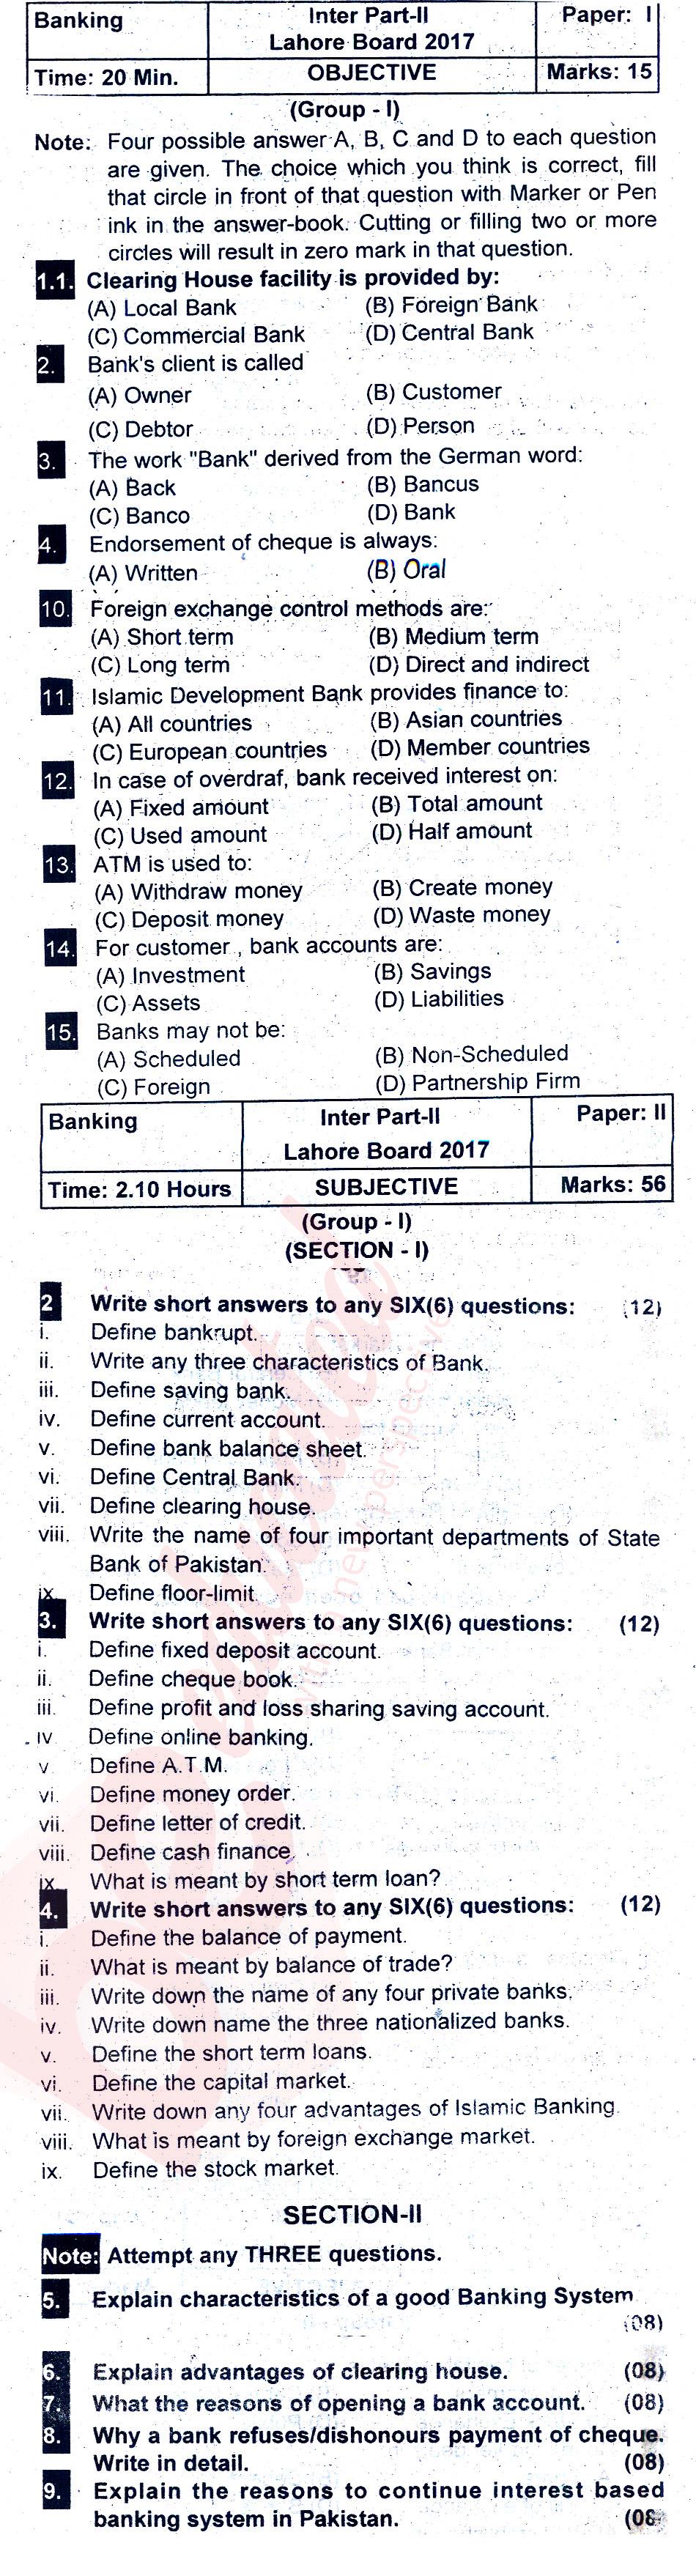 Principles of Banking ICOM Part 2 Past Paper Group 1 BISE Lahore 2017